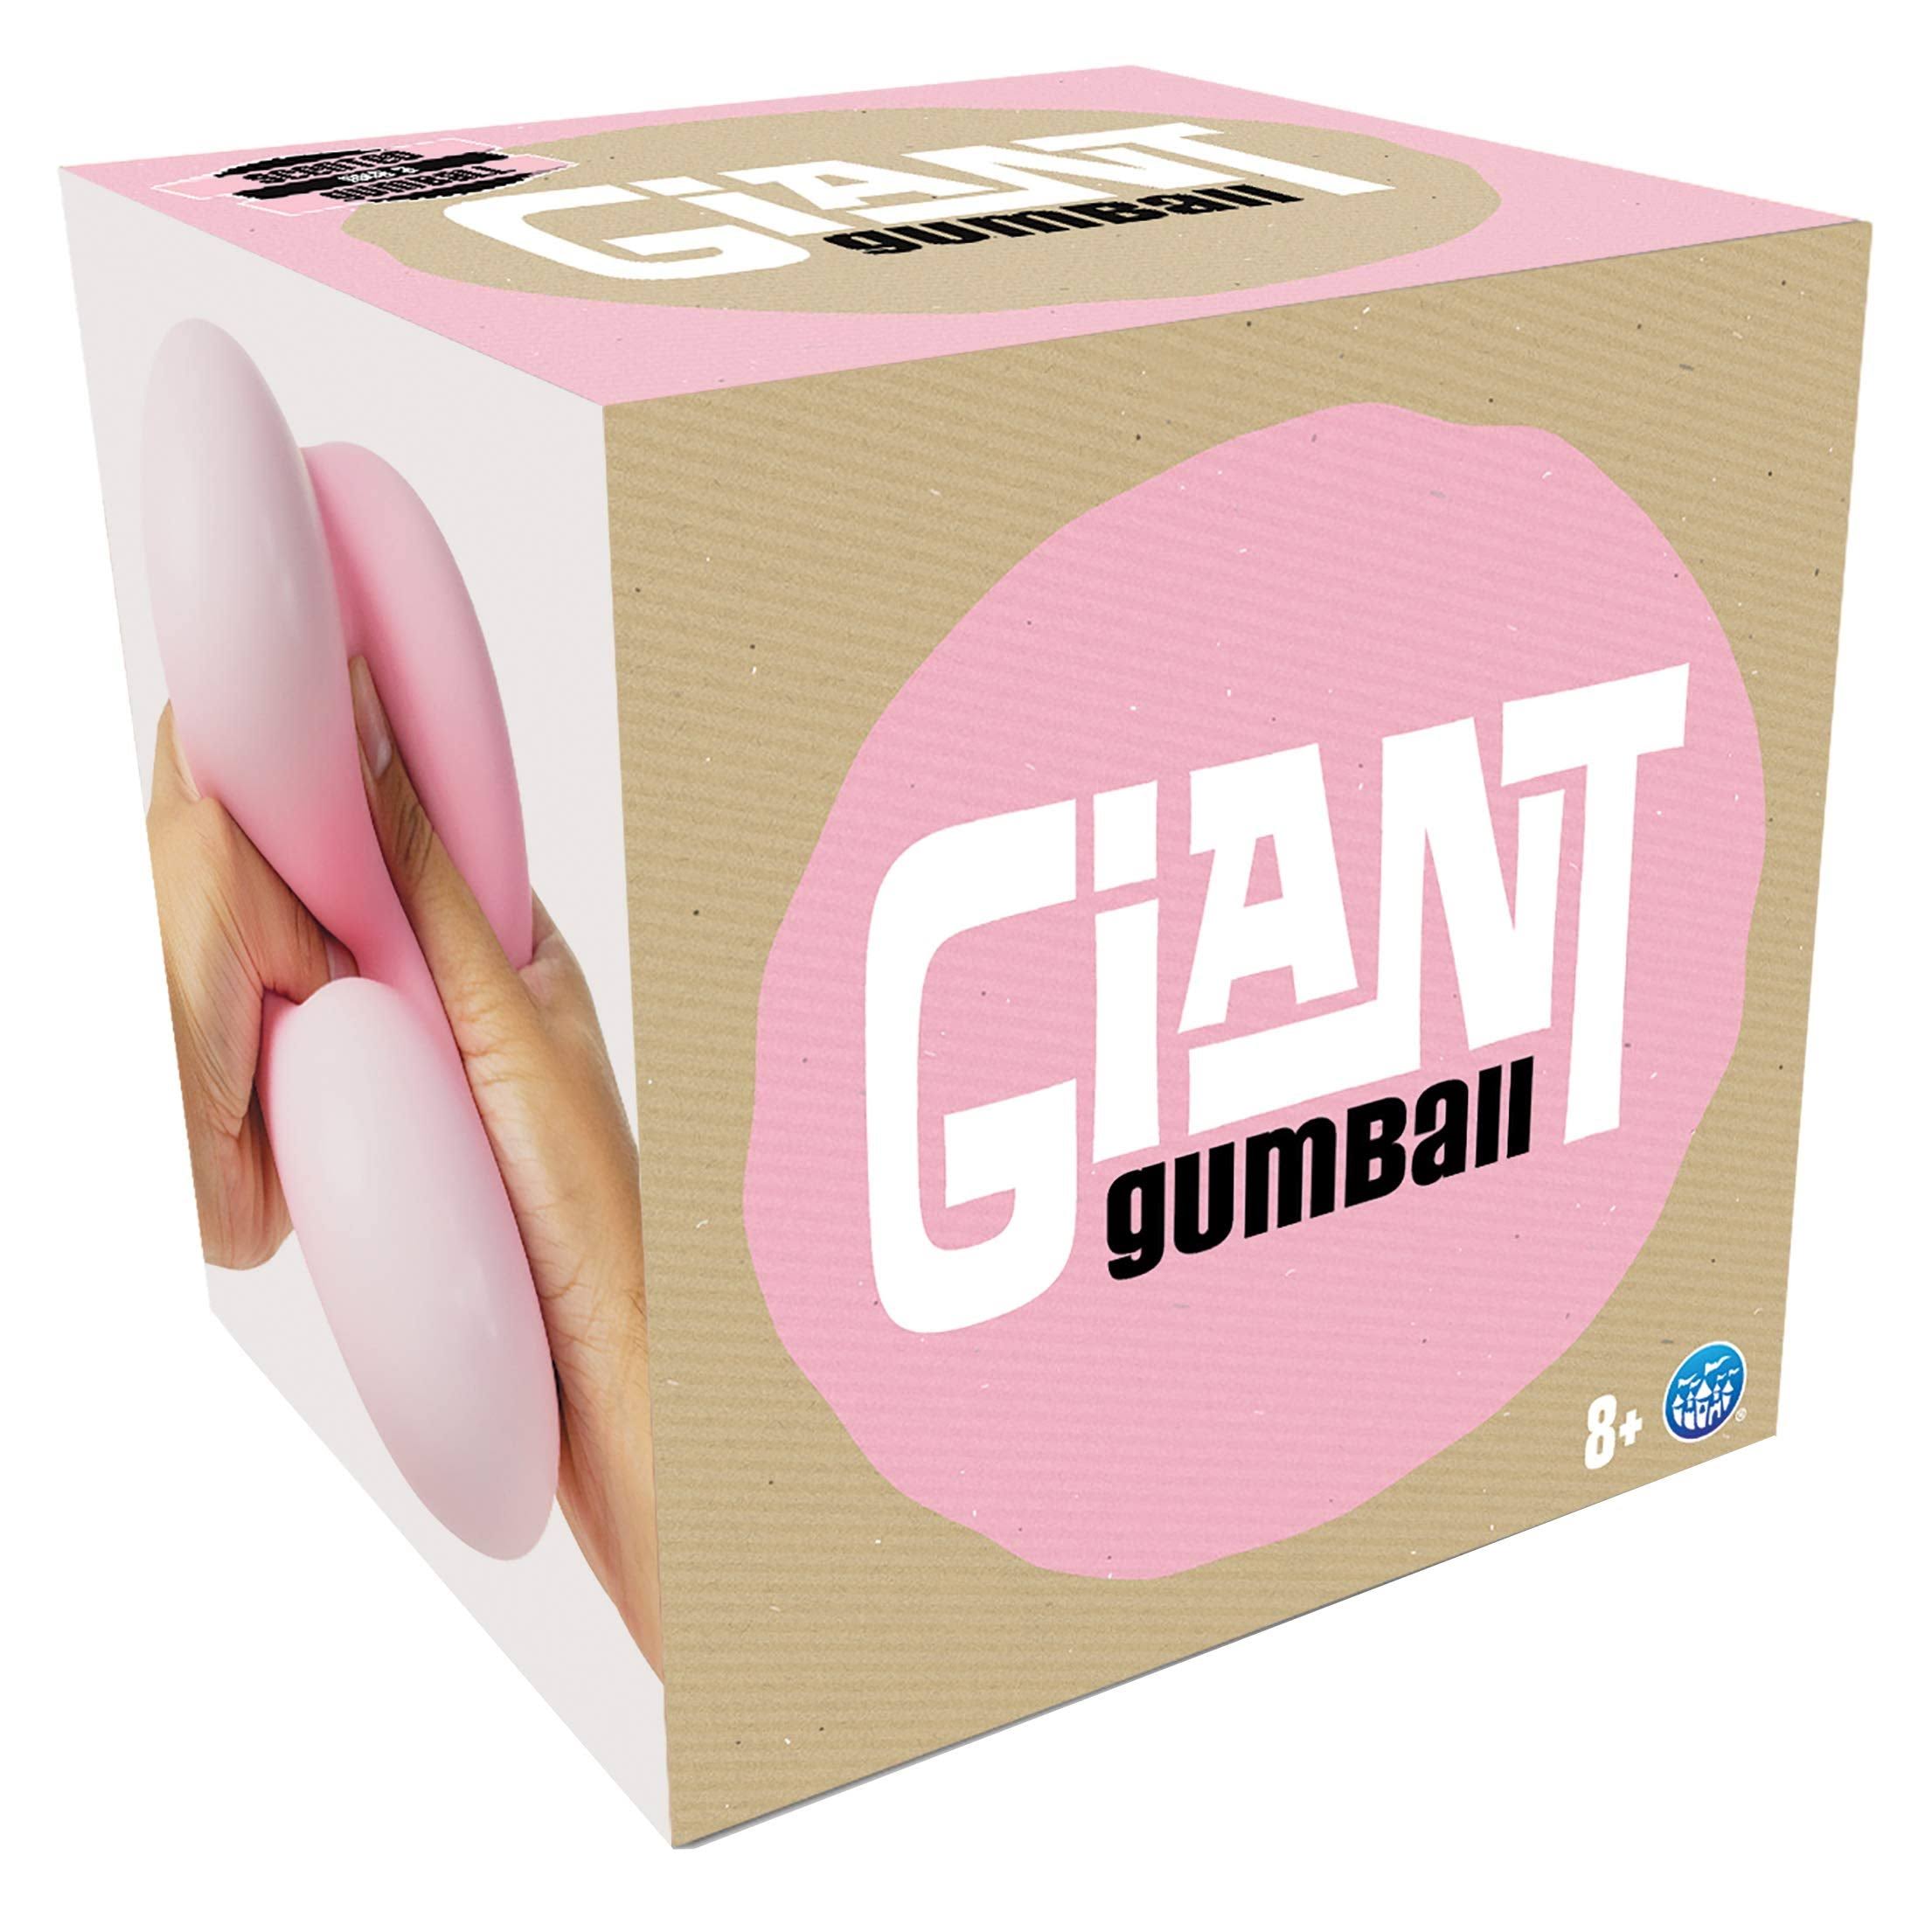 Play Visions Giant Gumball - Scented Stress Ball